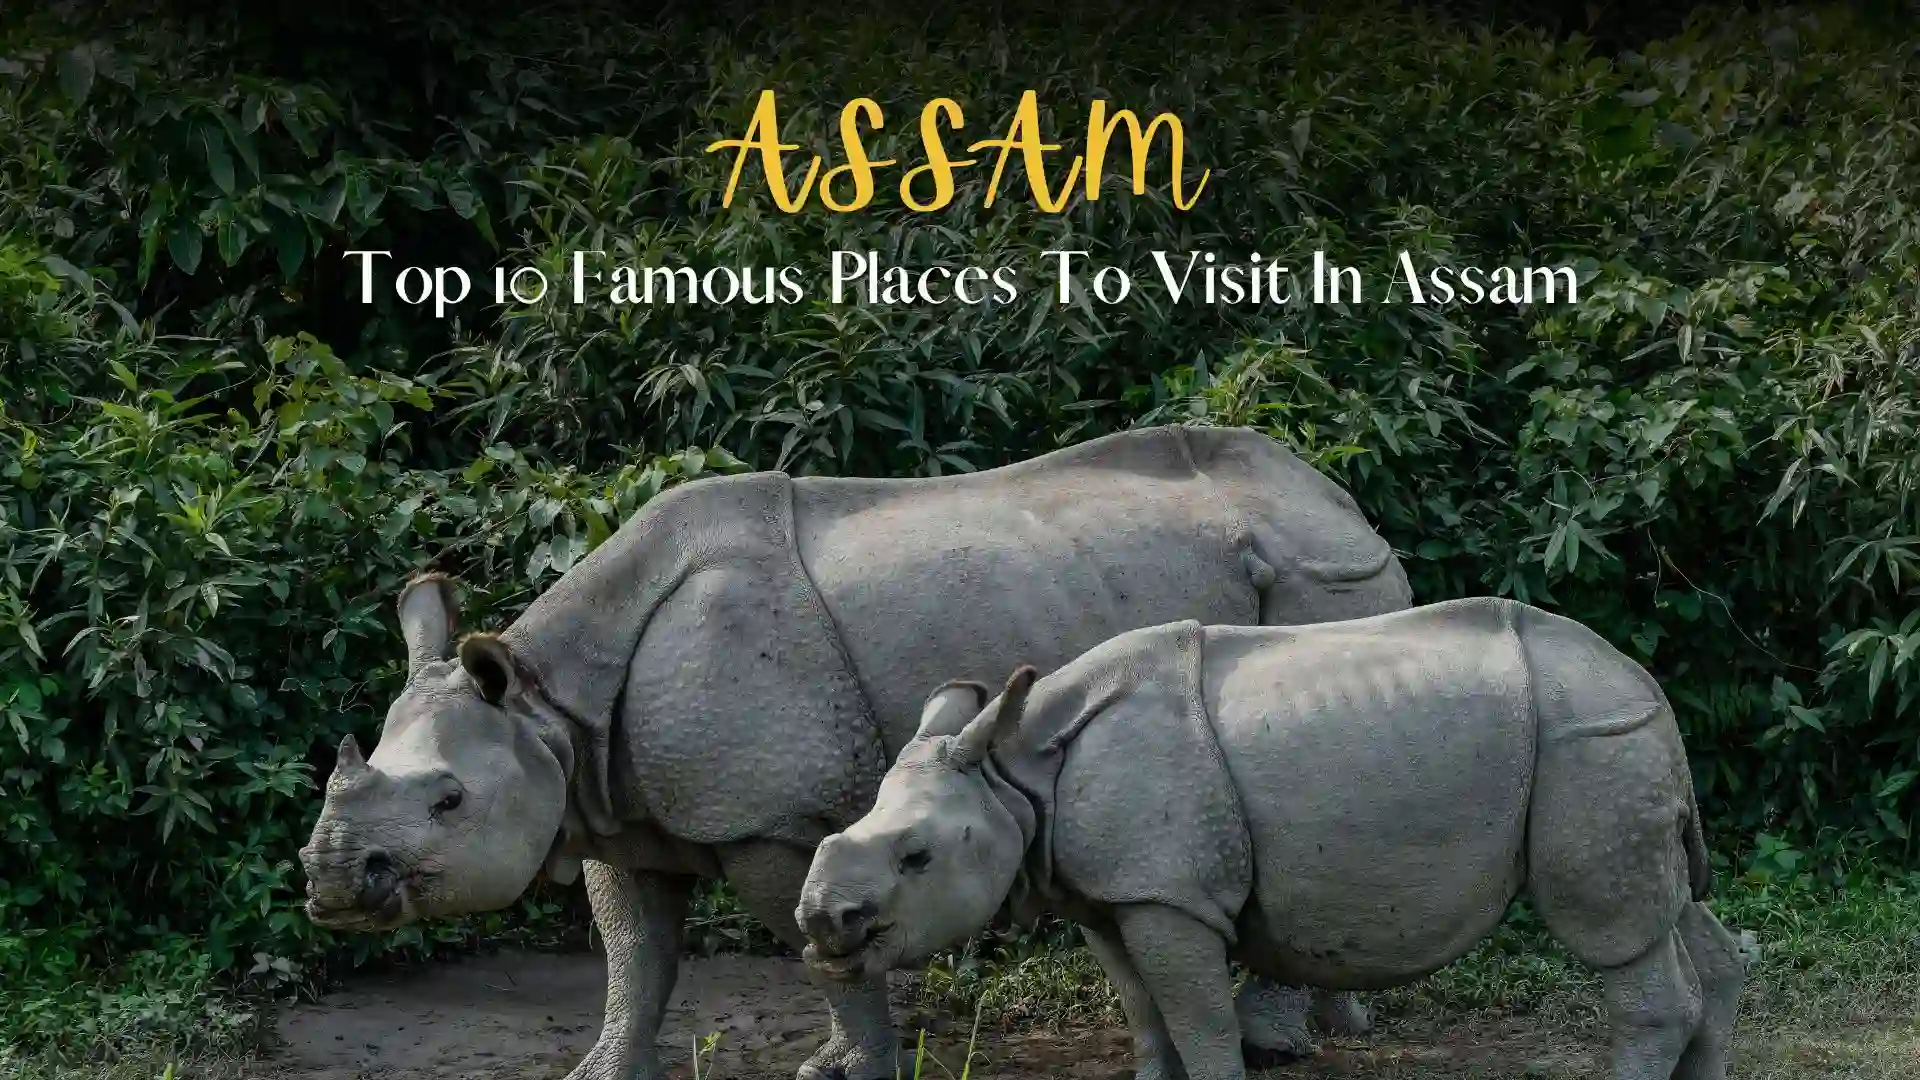 Top 10 famous places to visit in Assam